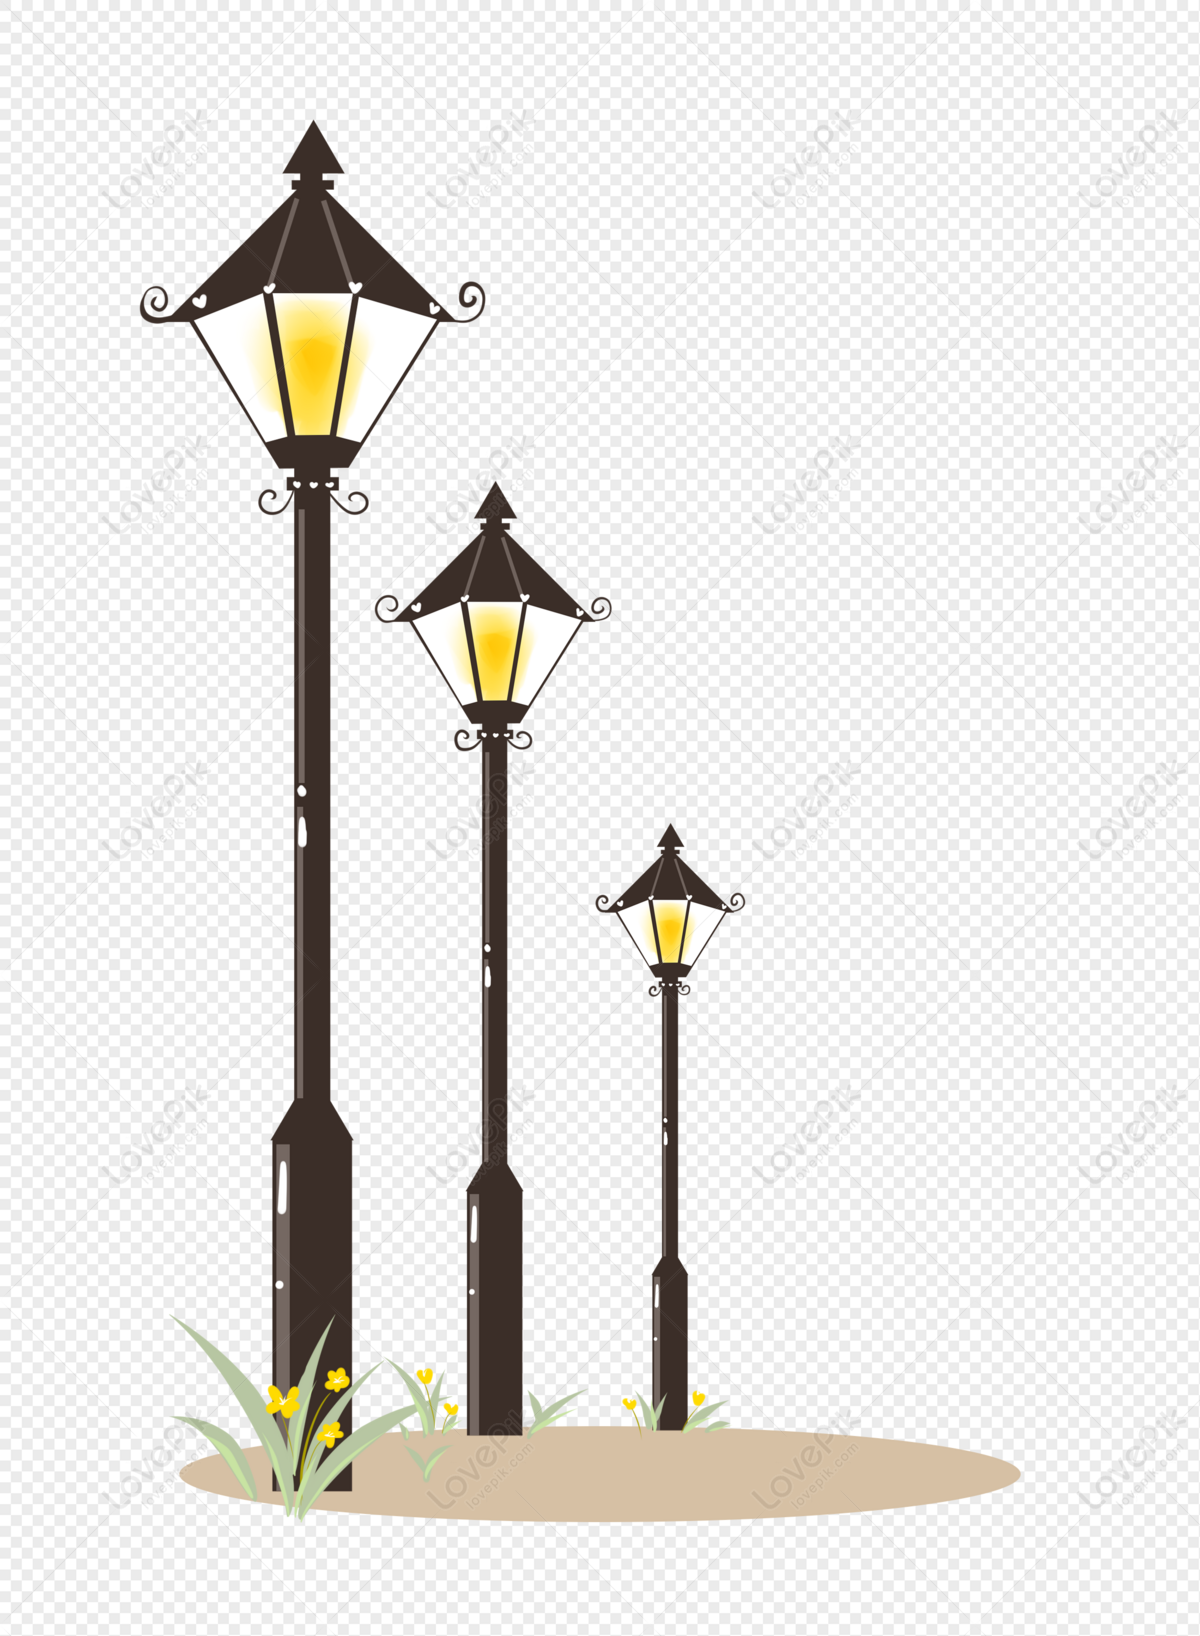 Cartoon Street Light PNG Transparent Background And Clipart Image For Free  Download - Lovepik | 401502010